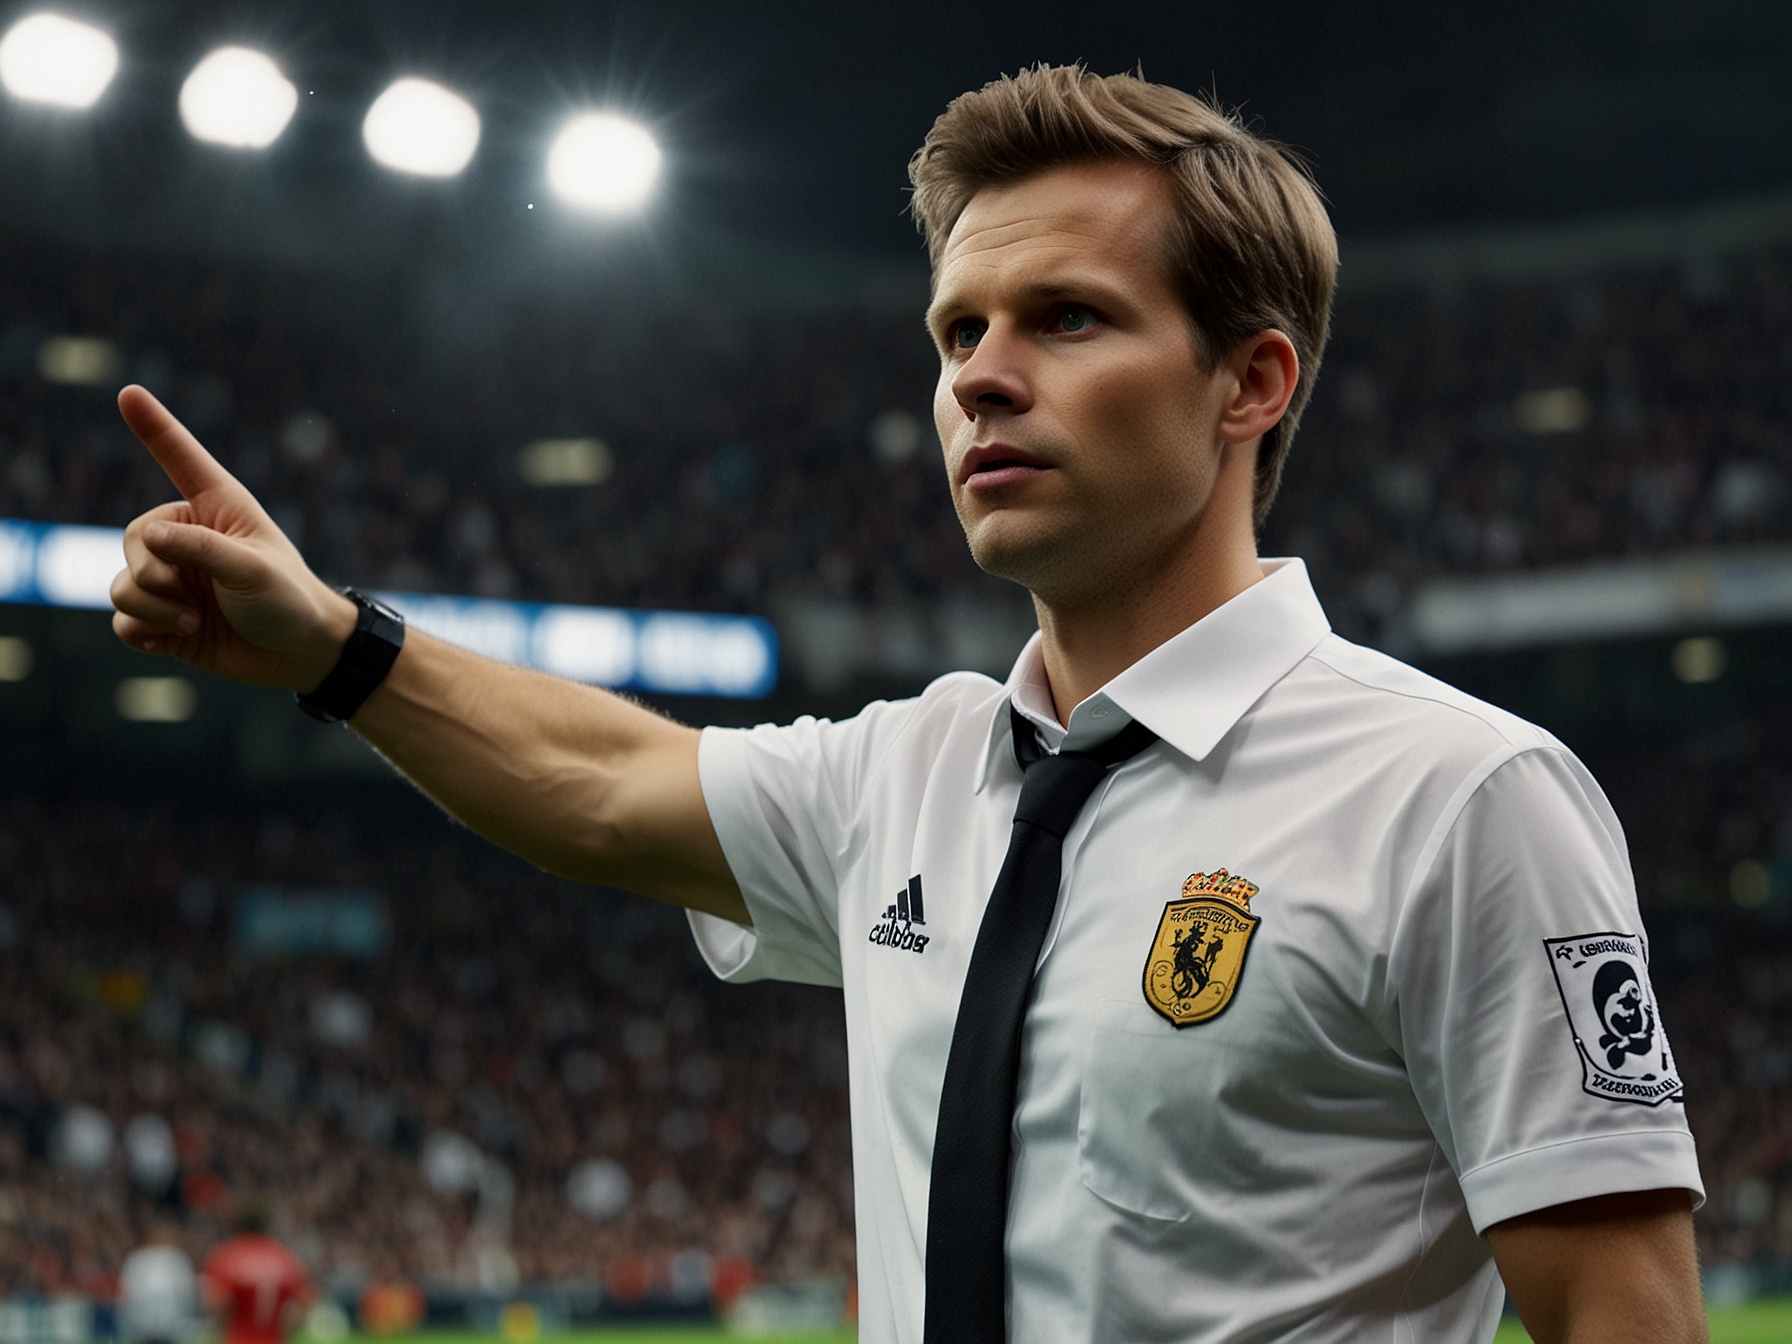 Dr. Felix Brych refereeing during a high-stakes football game.